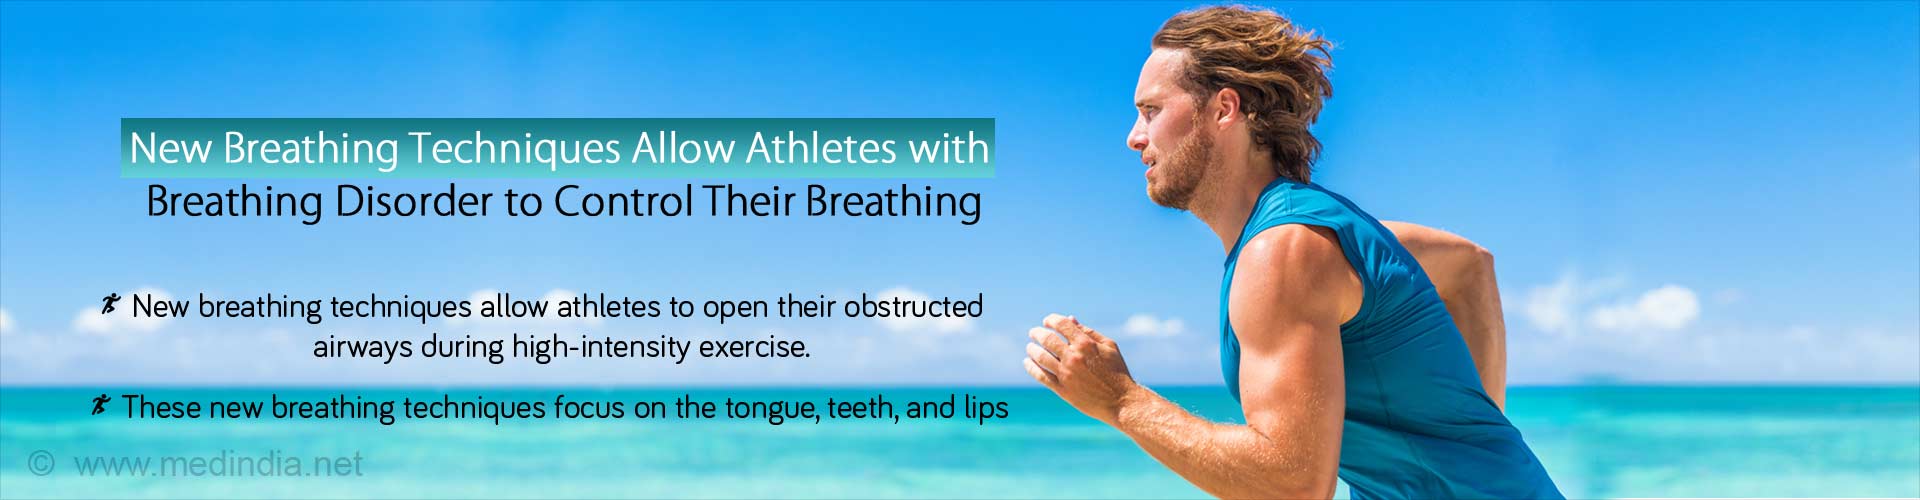 New breathing techniques allow athletes with breathing disorder to control their breathing
- New breathing techniques allow athletes to open their obstructed airways during high-intensity exercise
- These new breathing techniques focus on the tongue, teeth and lips